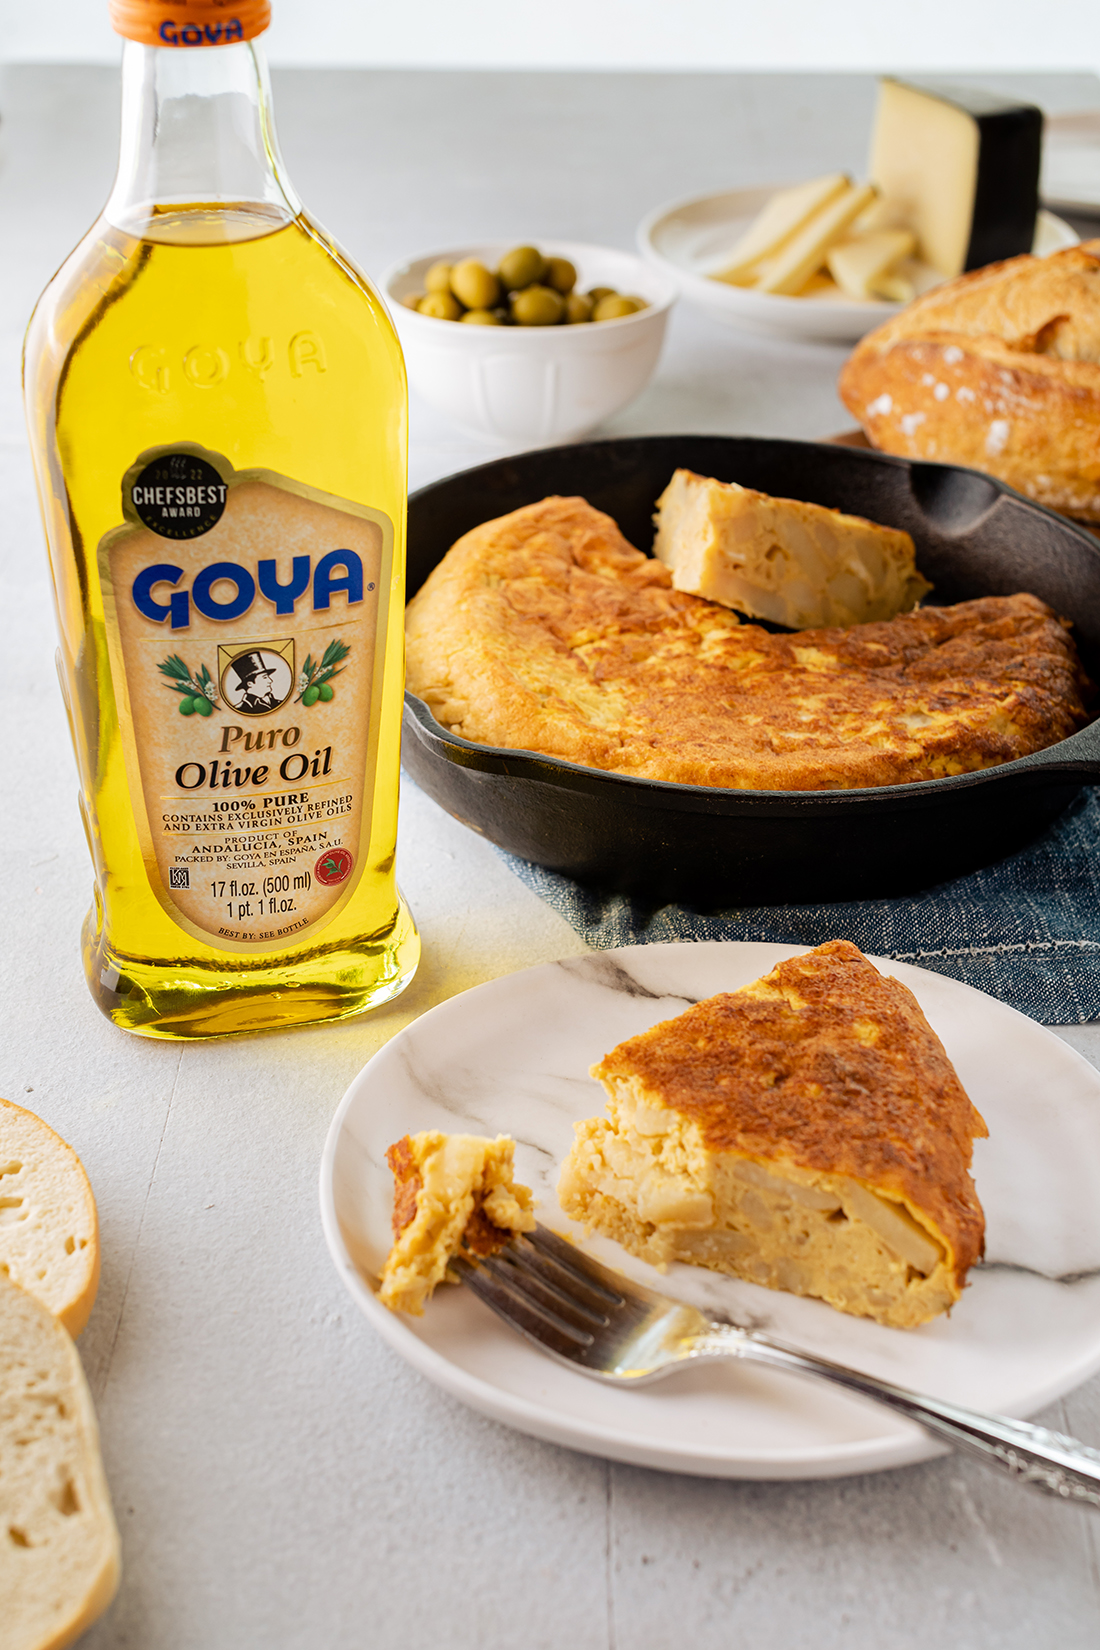 Spanish omelet with puro olive oil